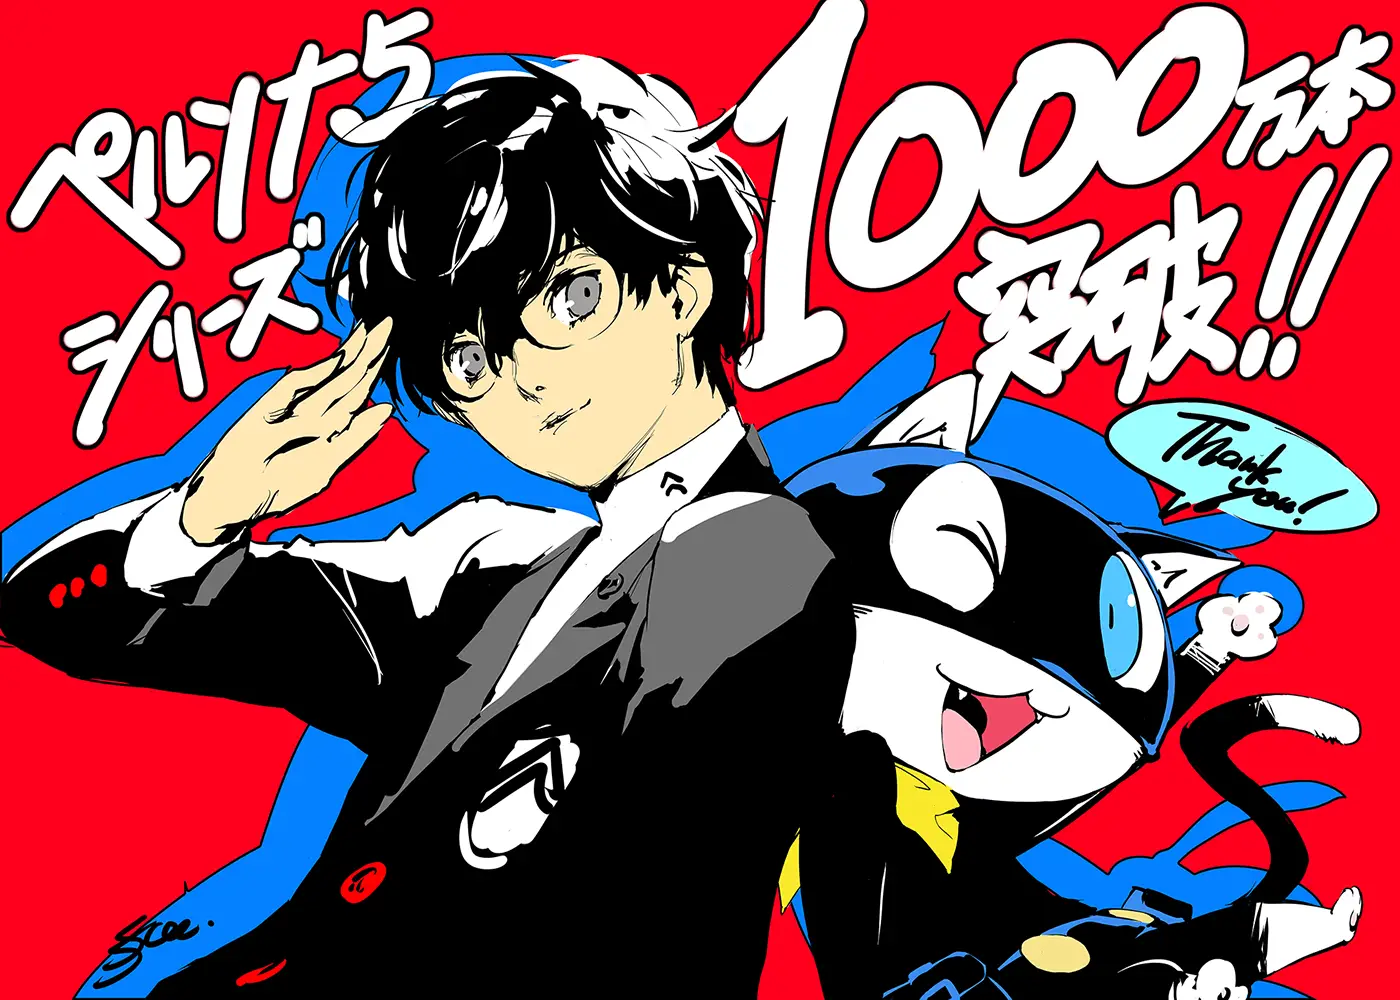 Persona 5 Series Celebrates Selling 10 Million Units with New Illustration